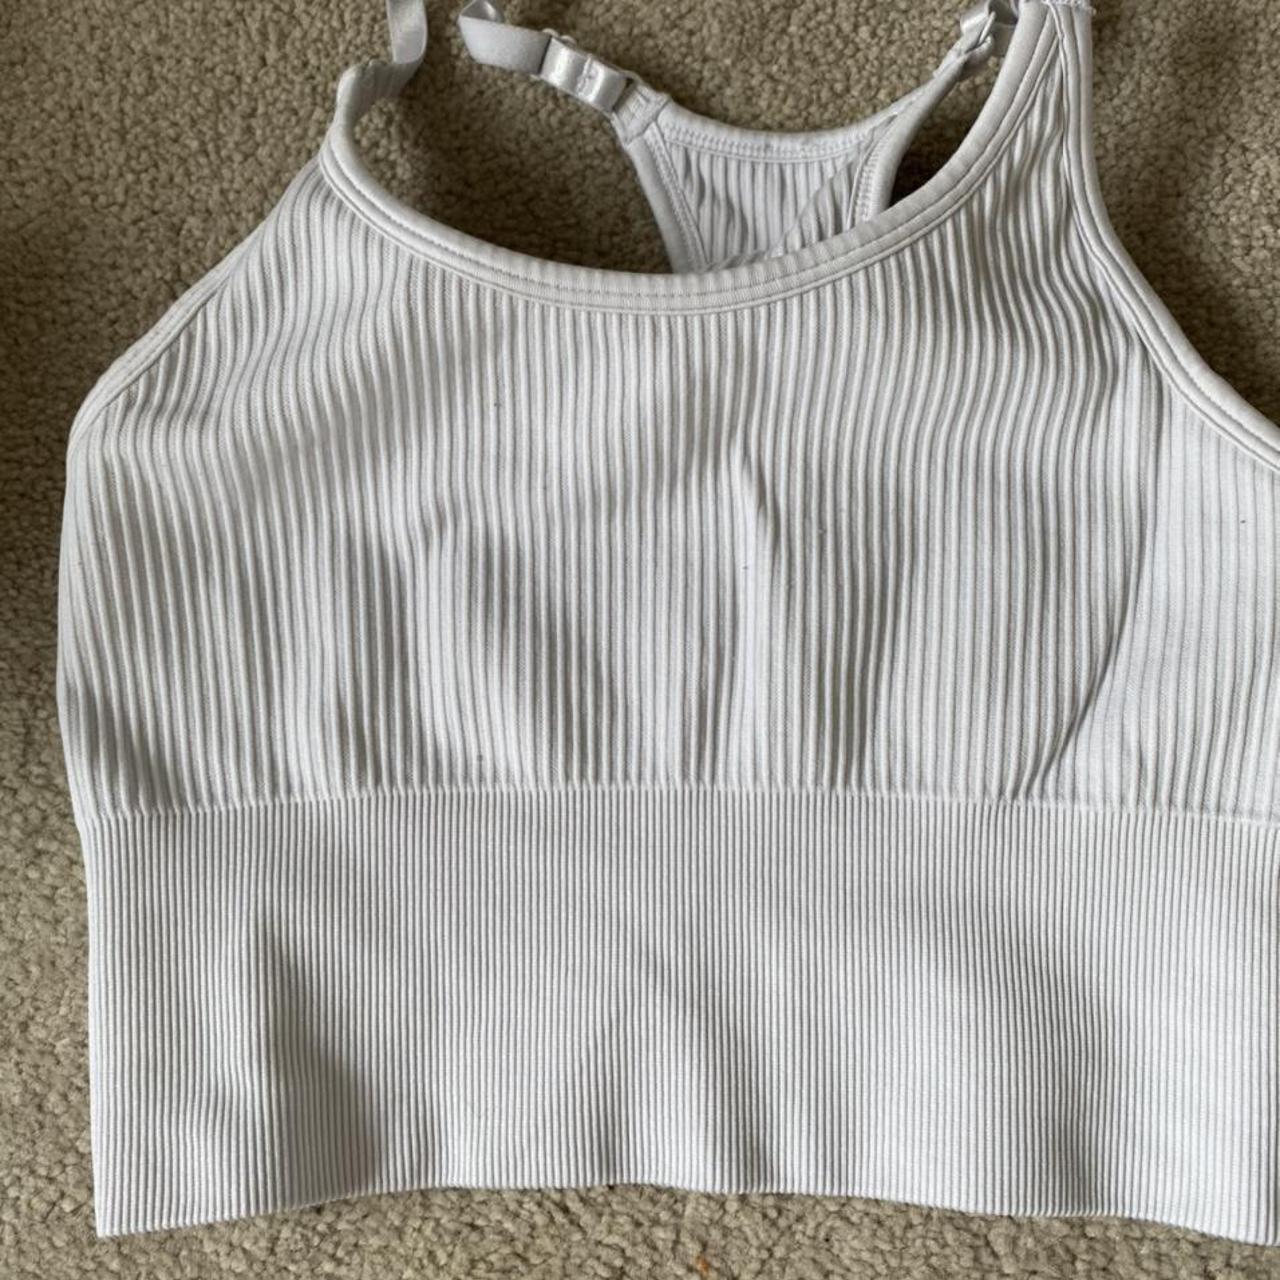 Product Image 1 - Balance athletica ribbed crop top.